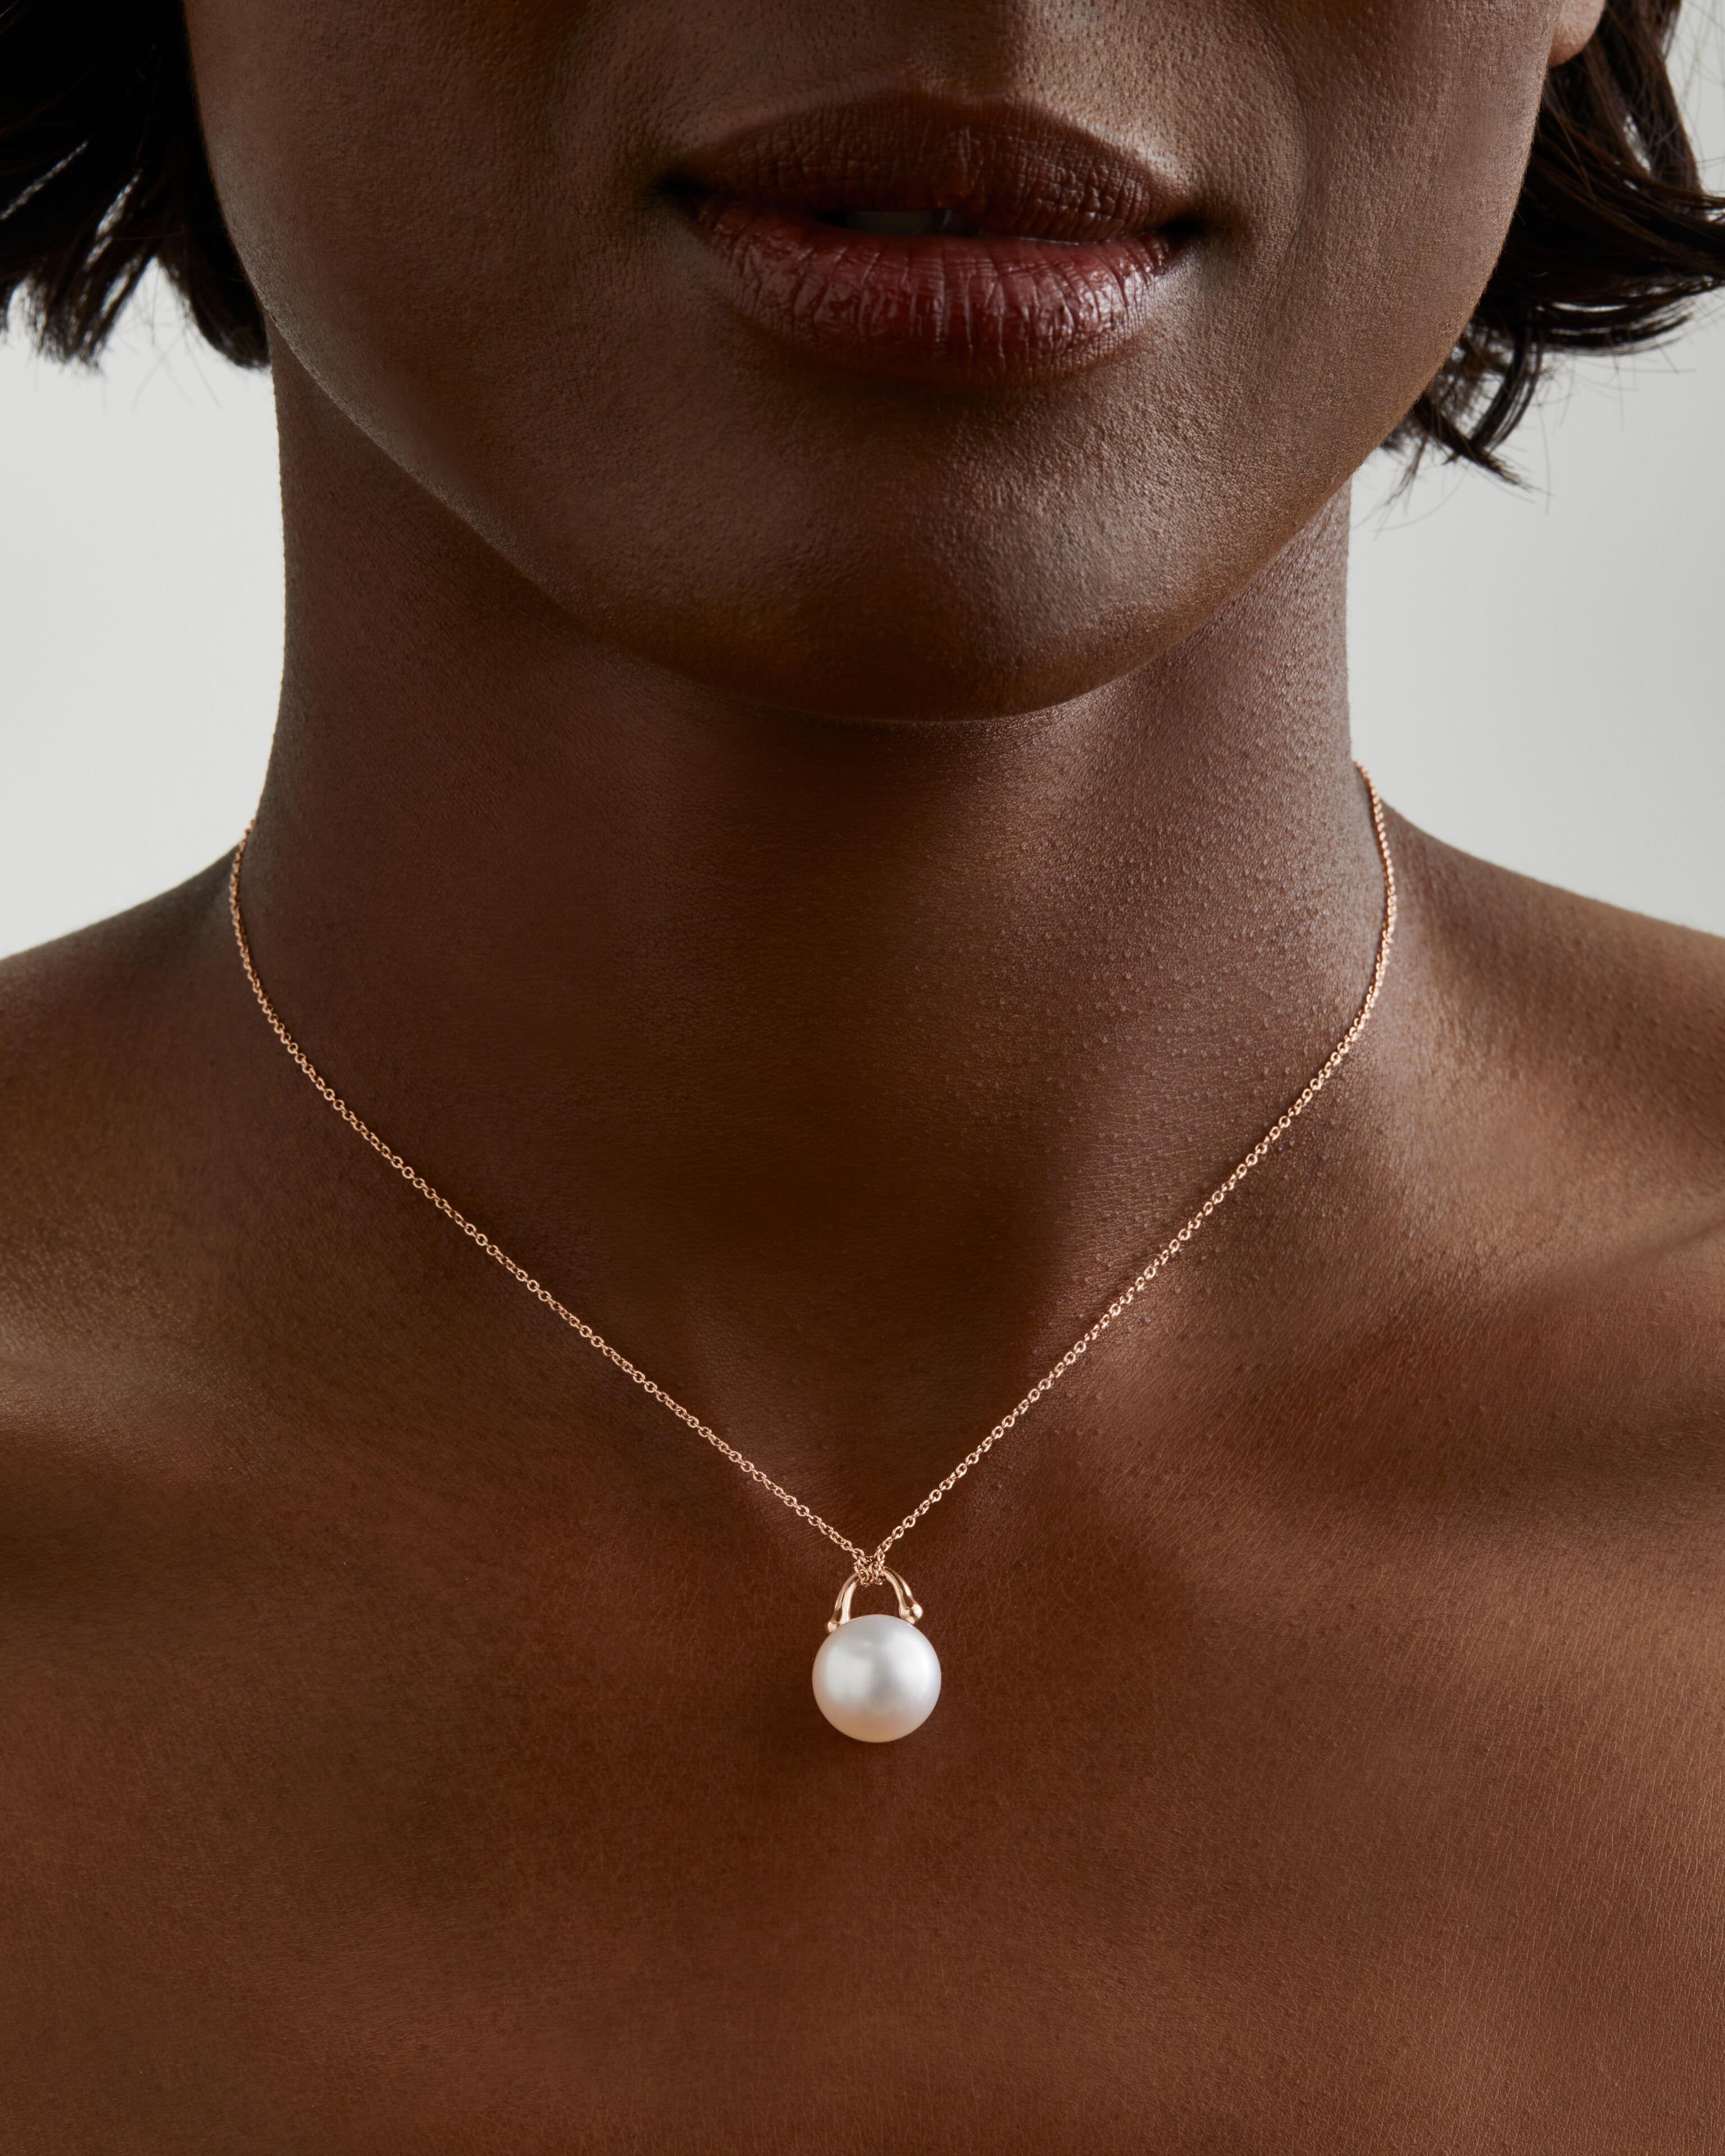 This unique pearl pendant by Roseate Jewelry features a single natural color round 12mm Austrailian South Sea pearl pendant framed in a setting with the structure of a padlock and the fluidity of water drops. Suspended from a delicate 18k rose gold